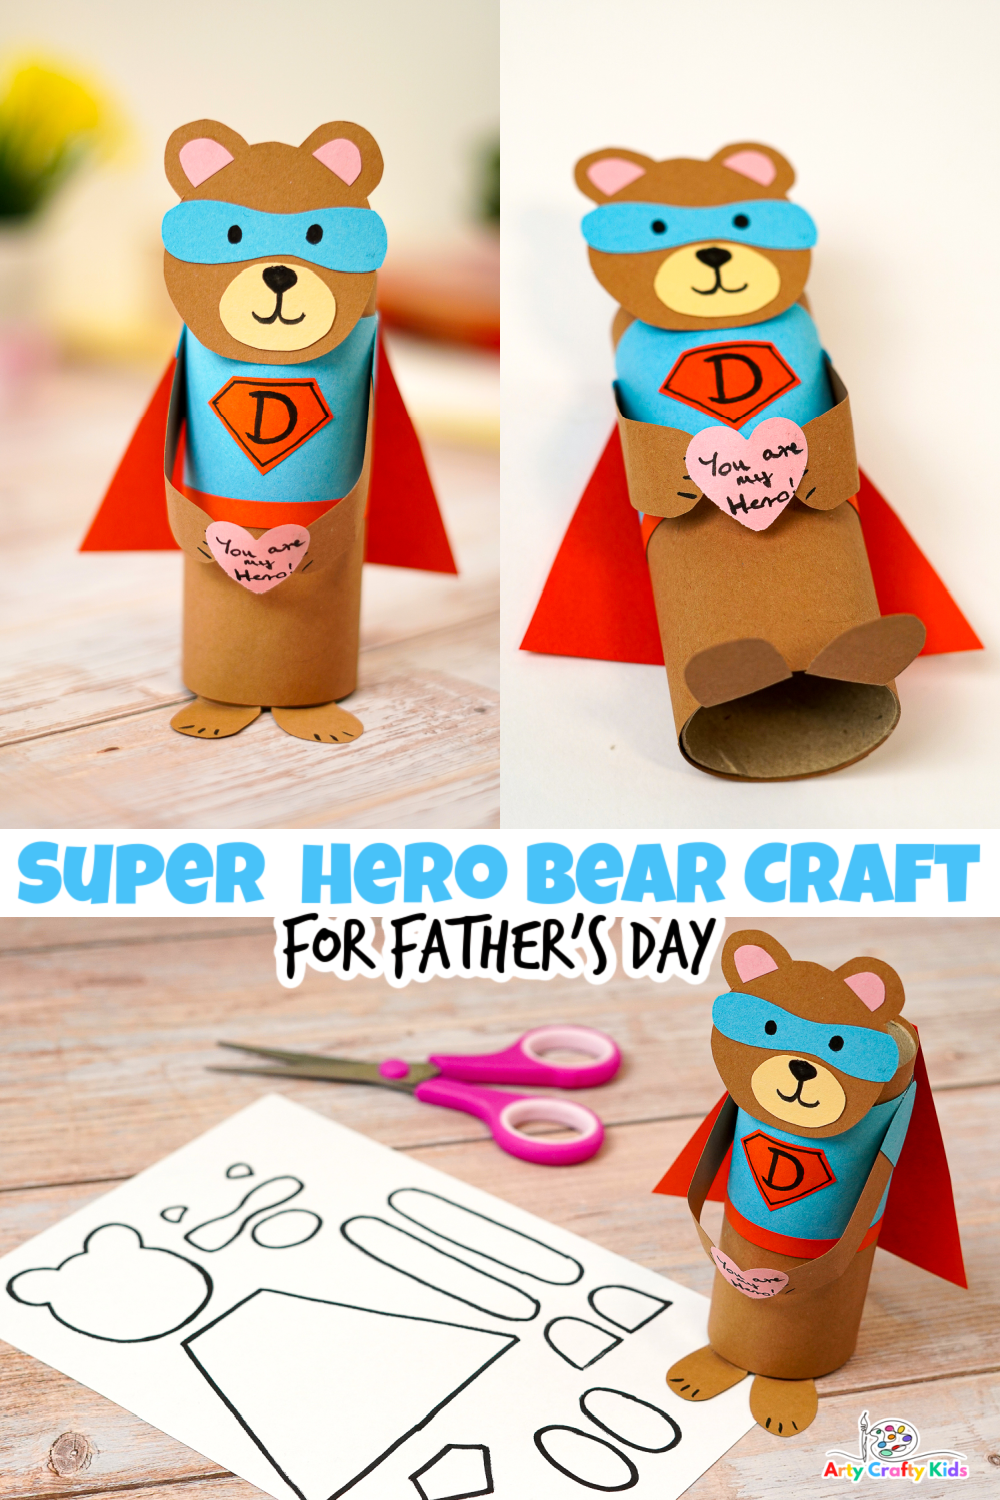 Father's Day is just around the corner, and what better way to show your dad how super he is than by creating a one-of-a-kind Paper Roll Superhero Bear Craft! 

This fun-filled craft is perfect for children aged 3 to 8, combining creativity, imagination, and a whole lot of superhero spirit.